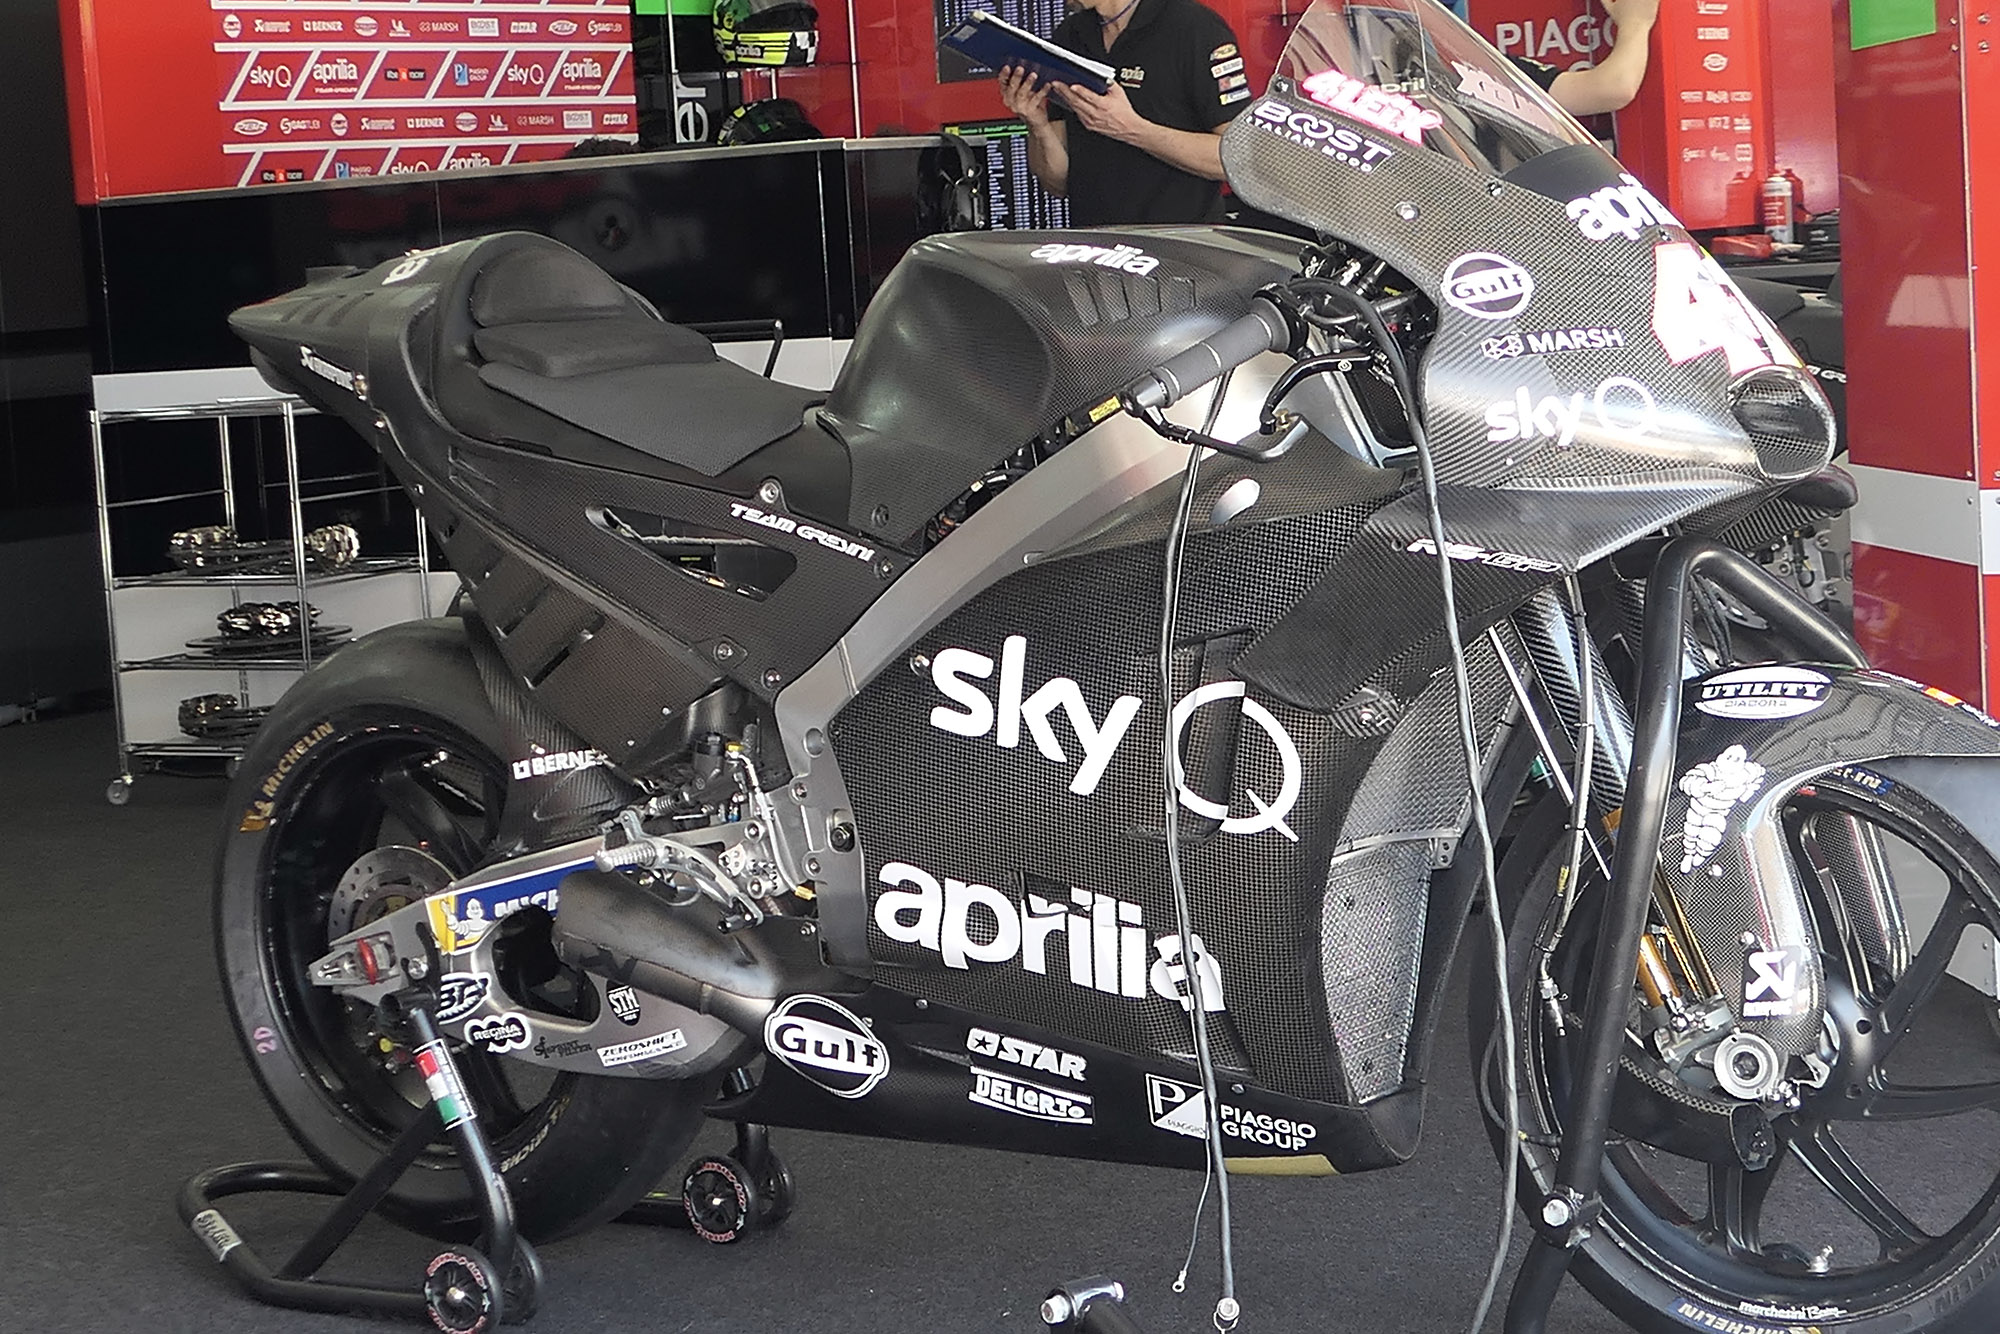 Aprilia RS-GP in the pits at Sepang during MotoGP testing in February 2019